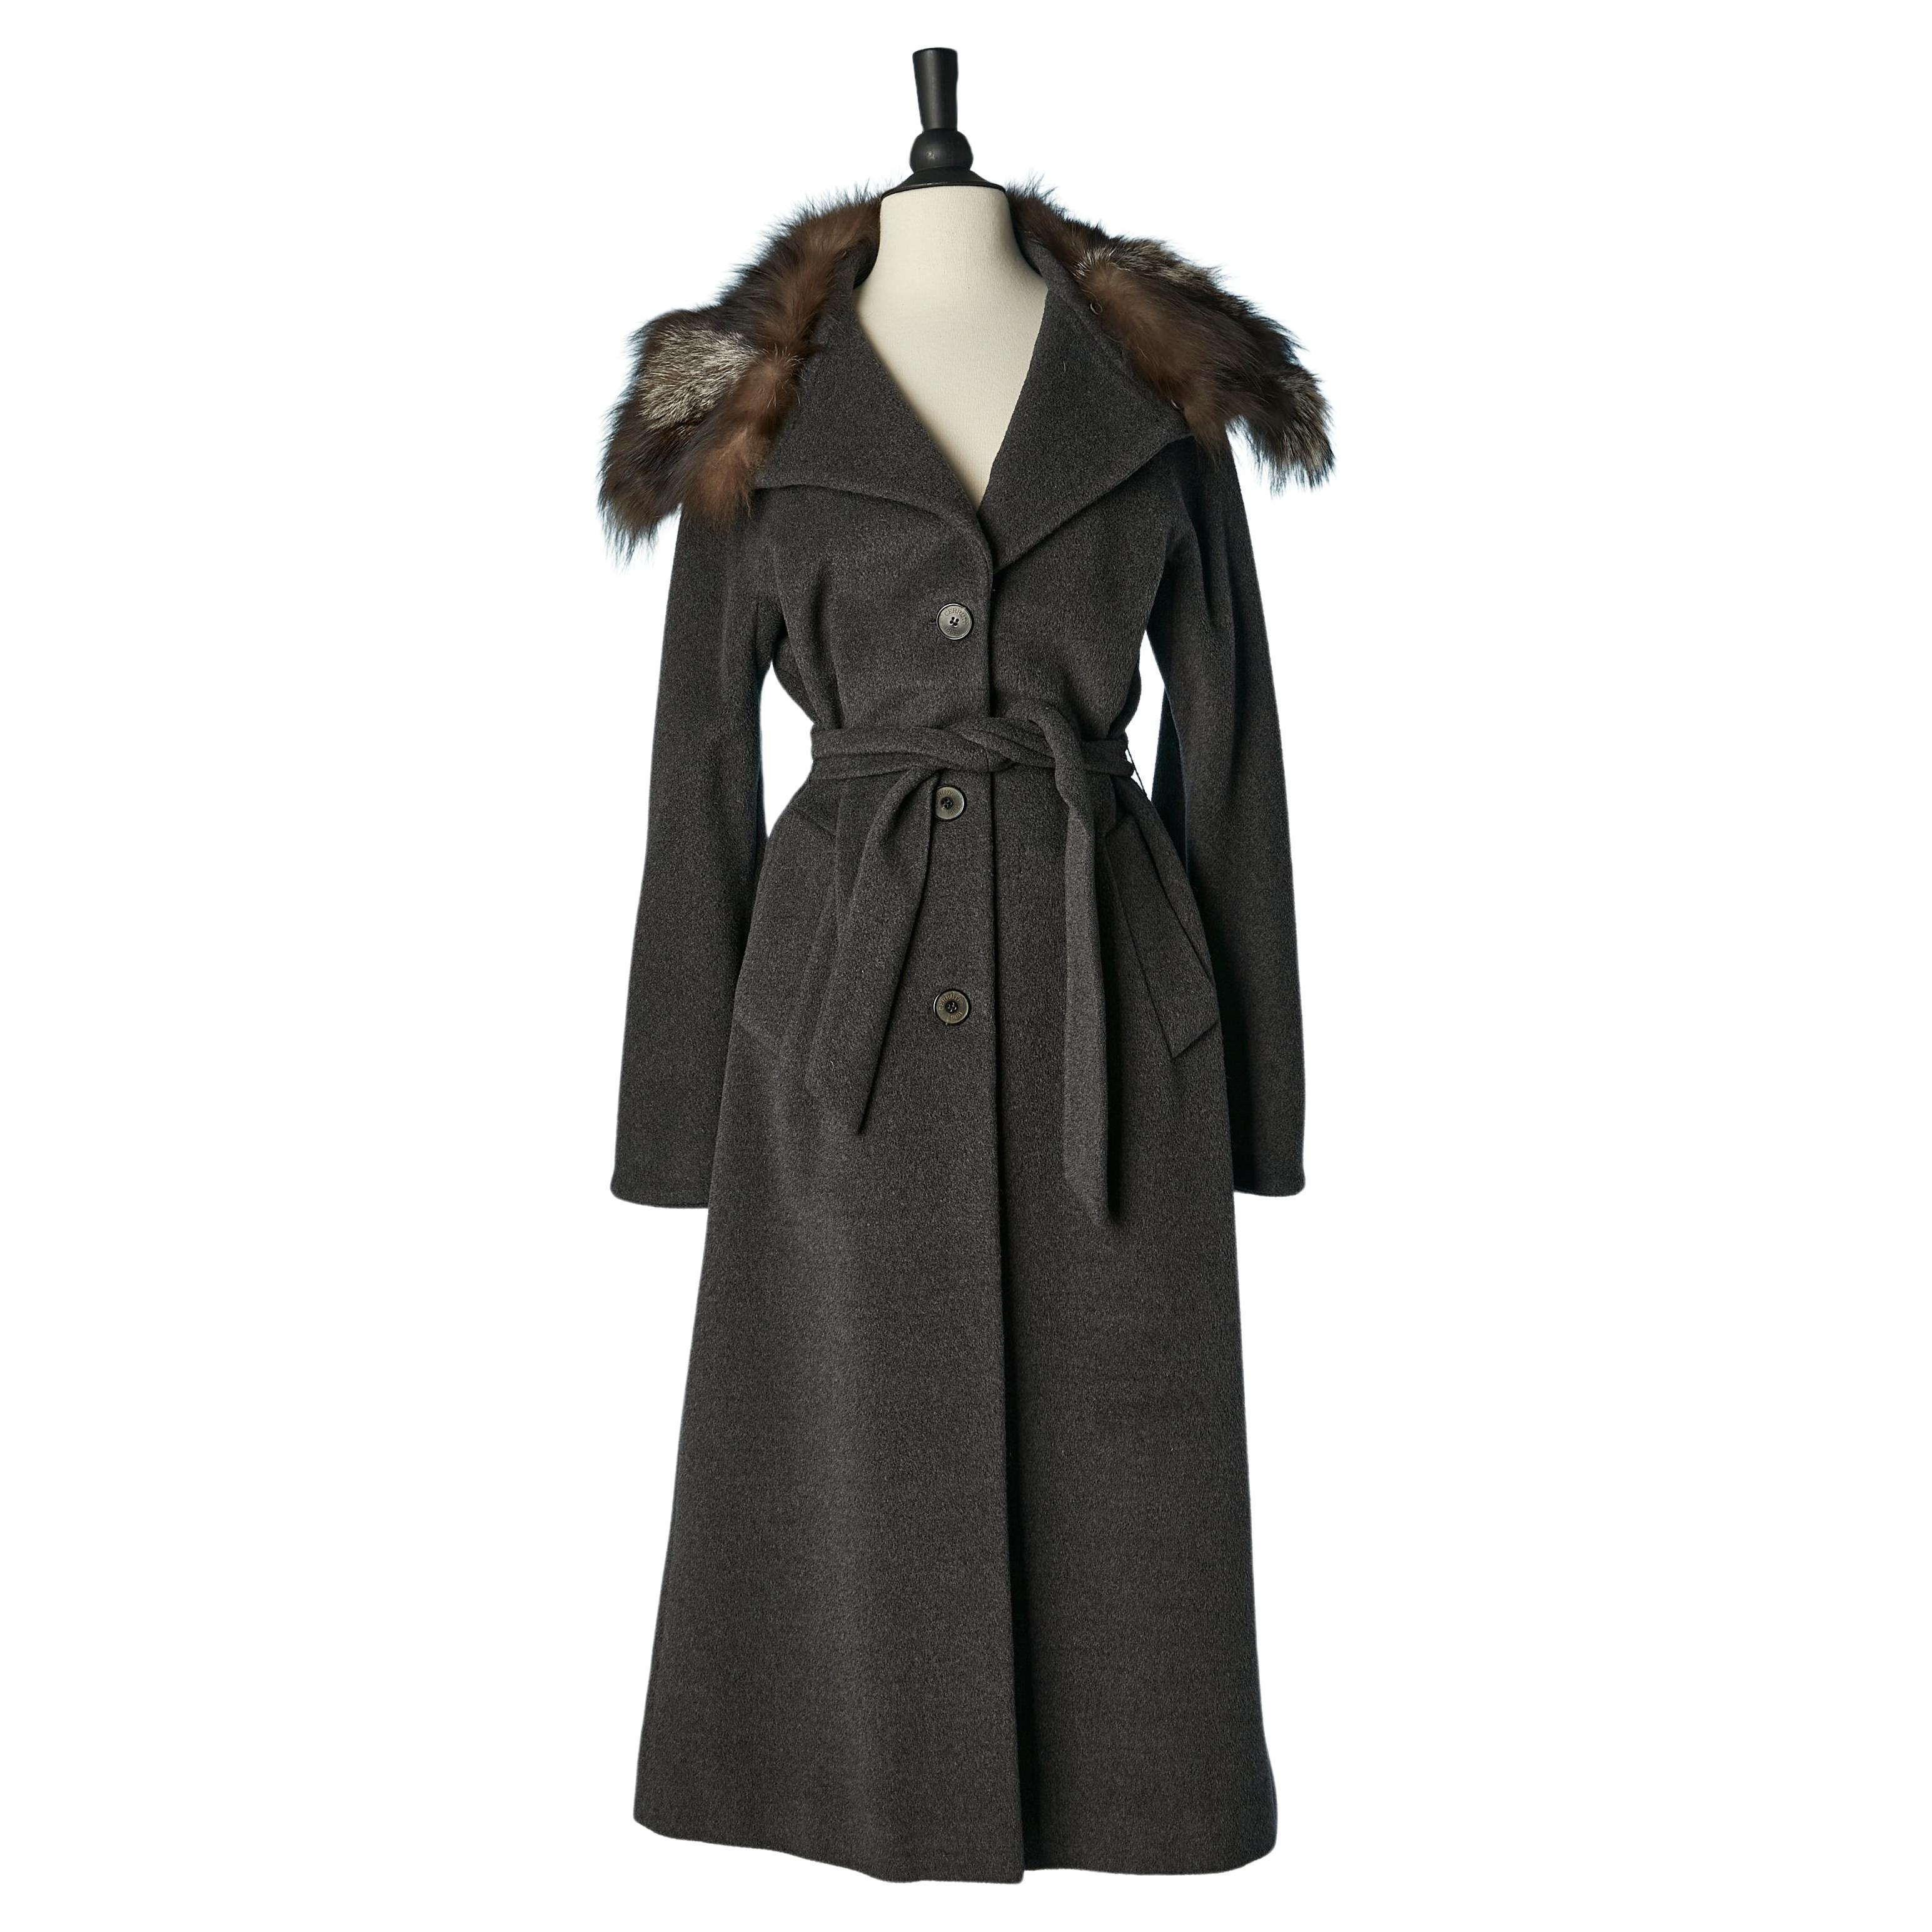 Grey single breasted wool coat with fur collar and belt CERRUTI 1881 